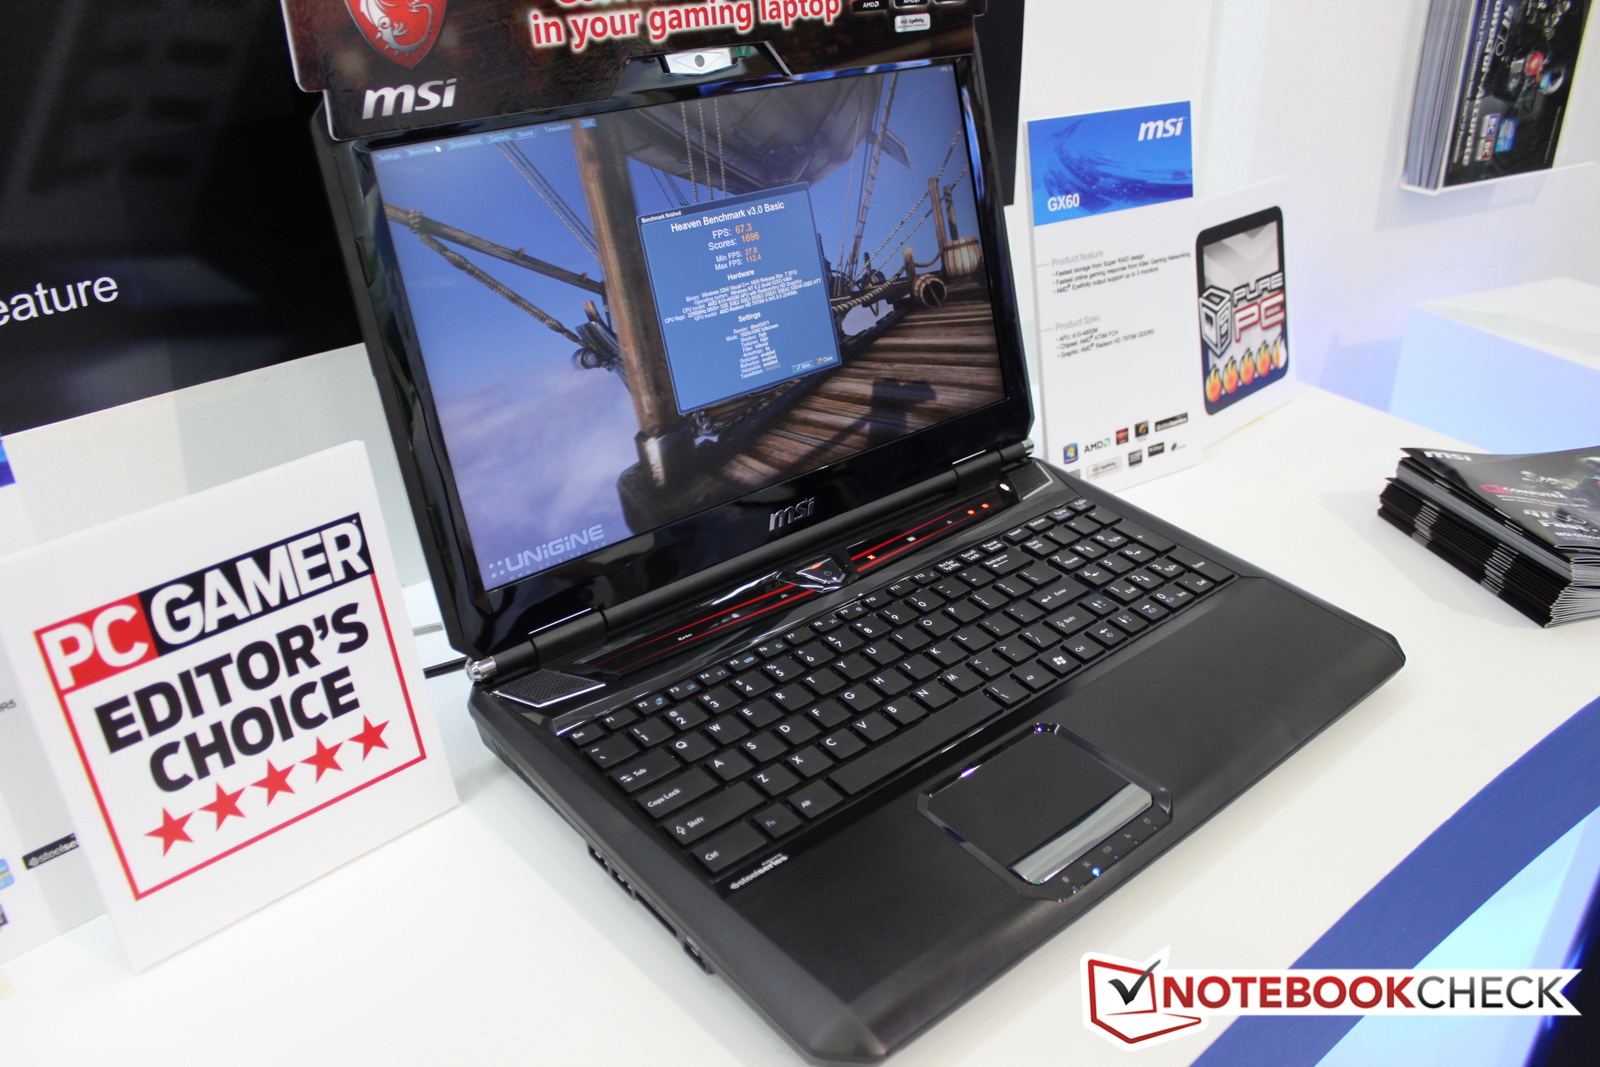 MSI unveils GX60 notebook with AMD A10-4600M APU and new CR/CX Series